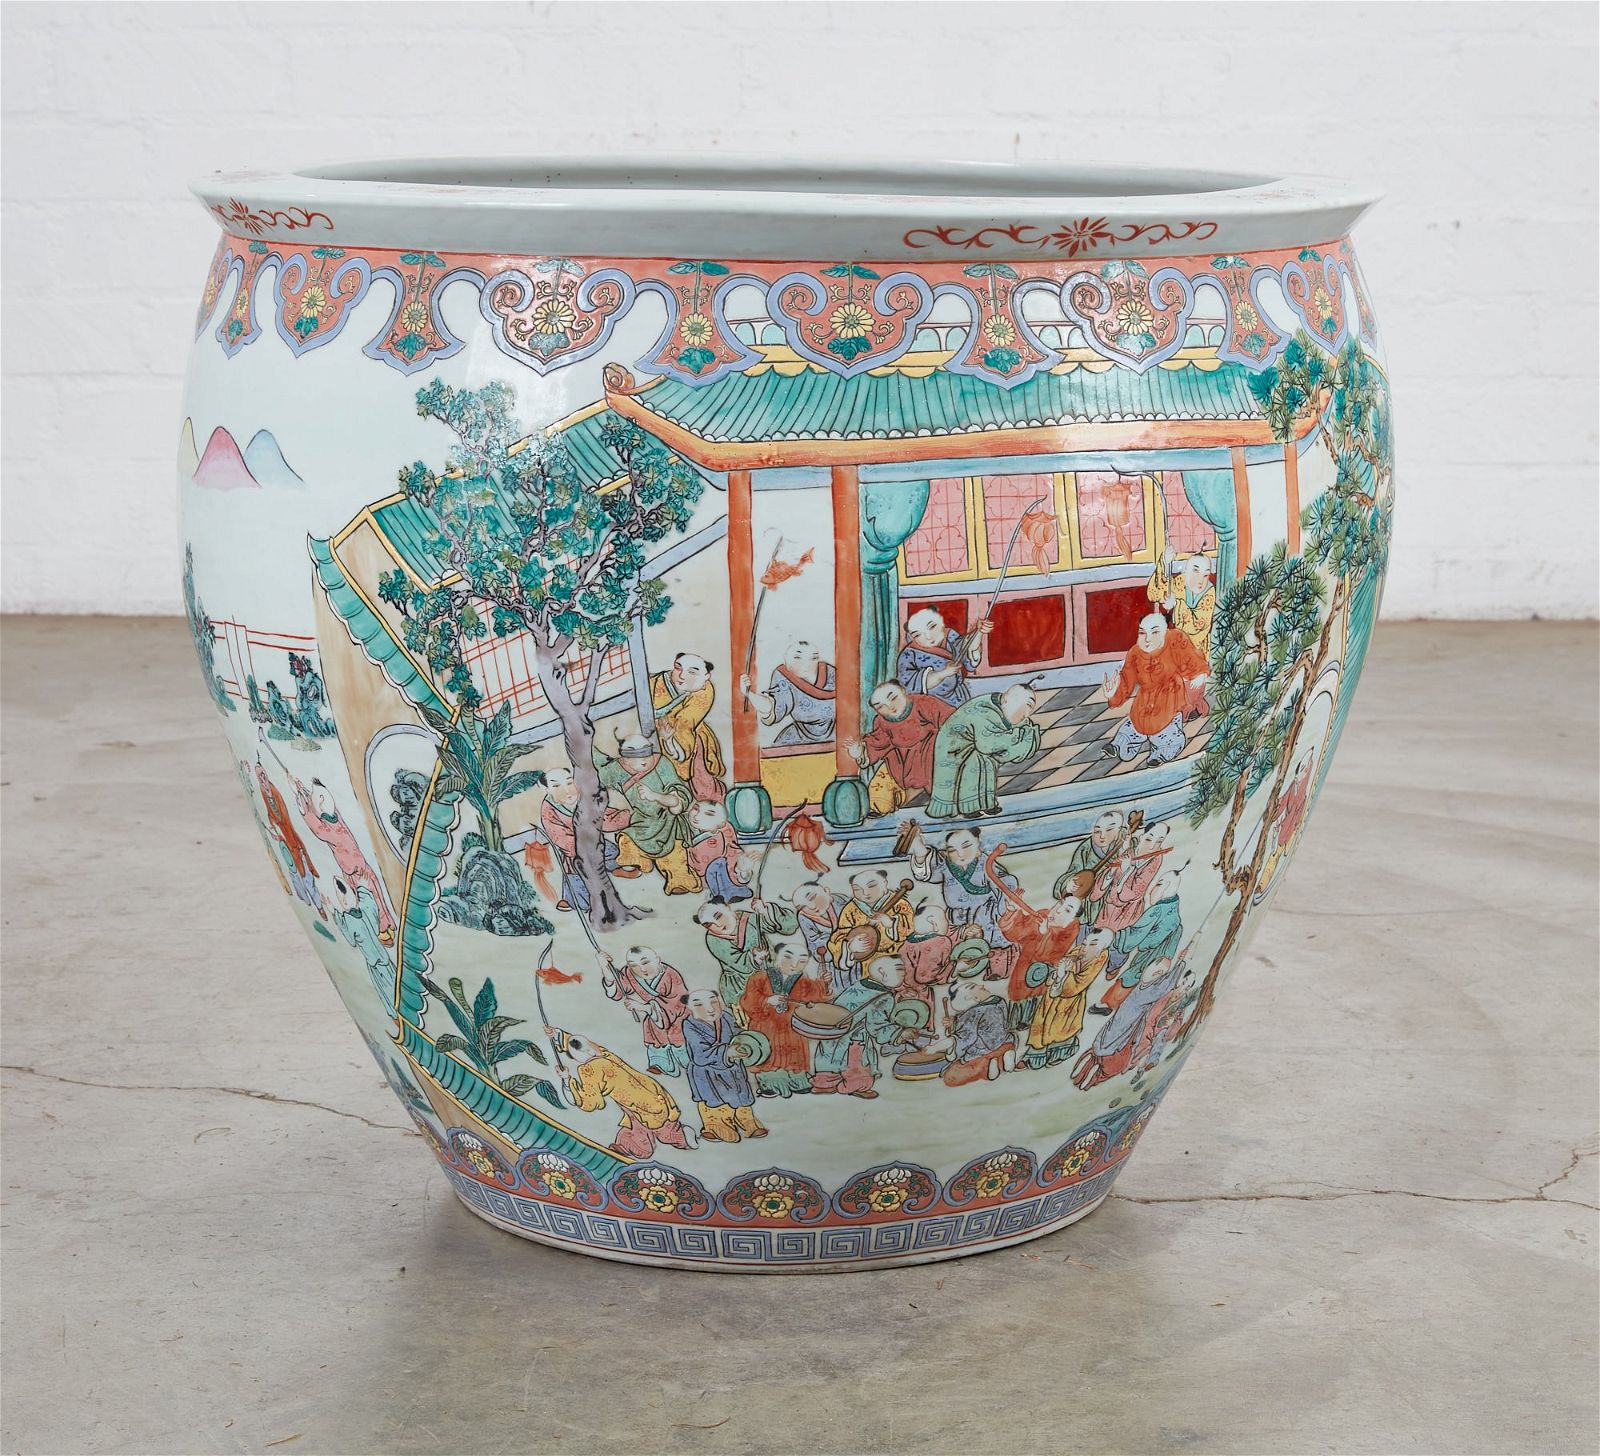 A LARGE DECORATIVE CHINESE PORCELAIN